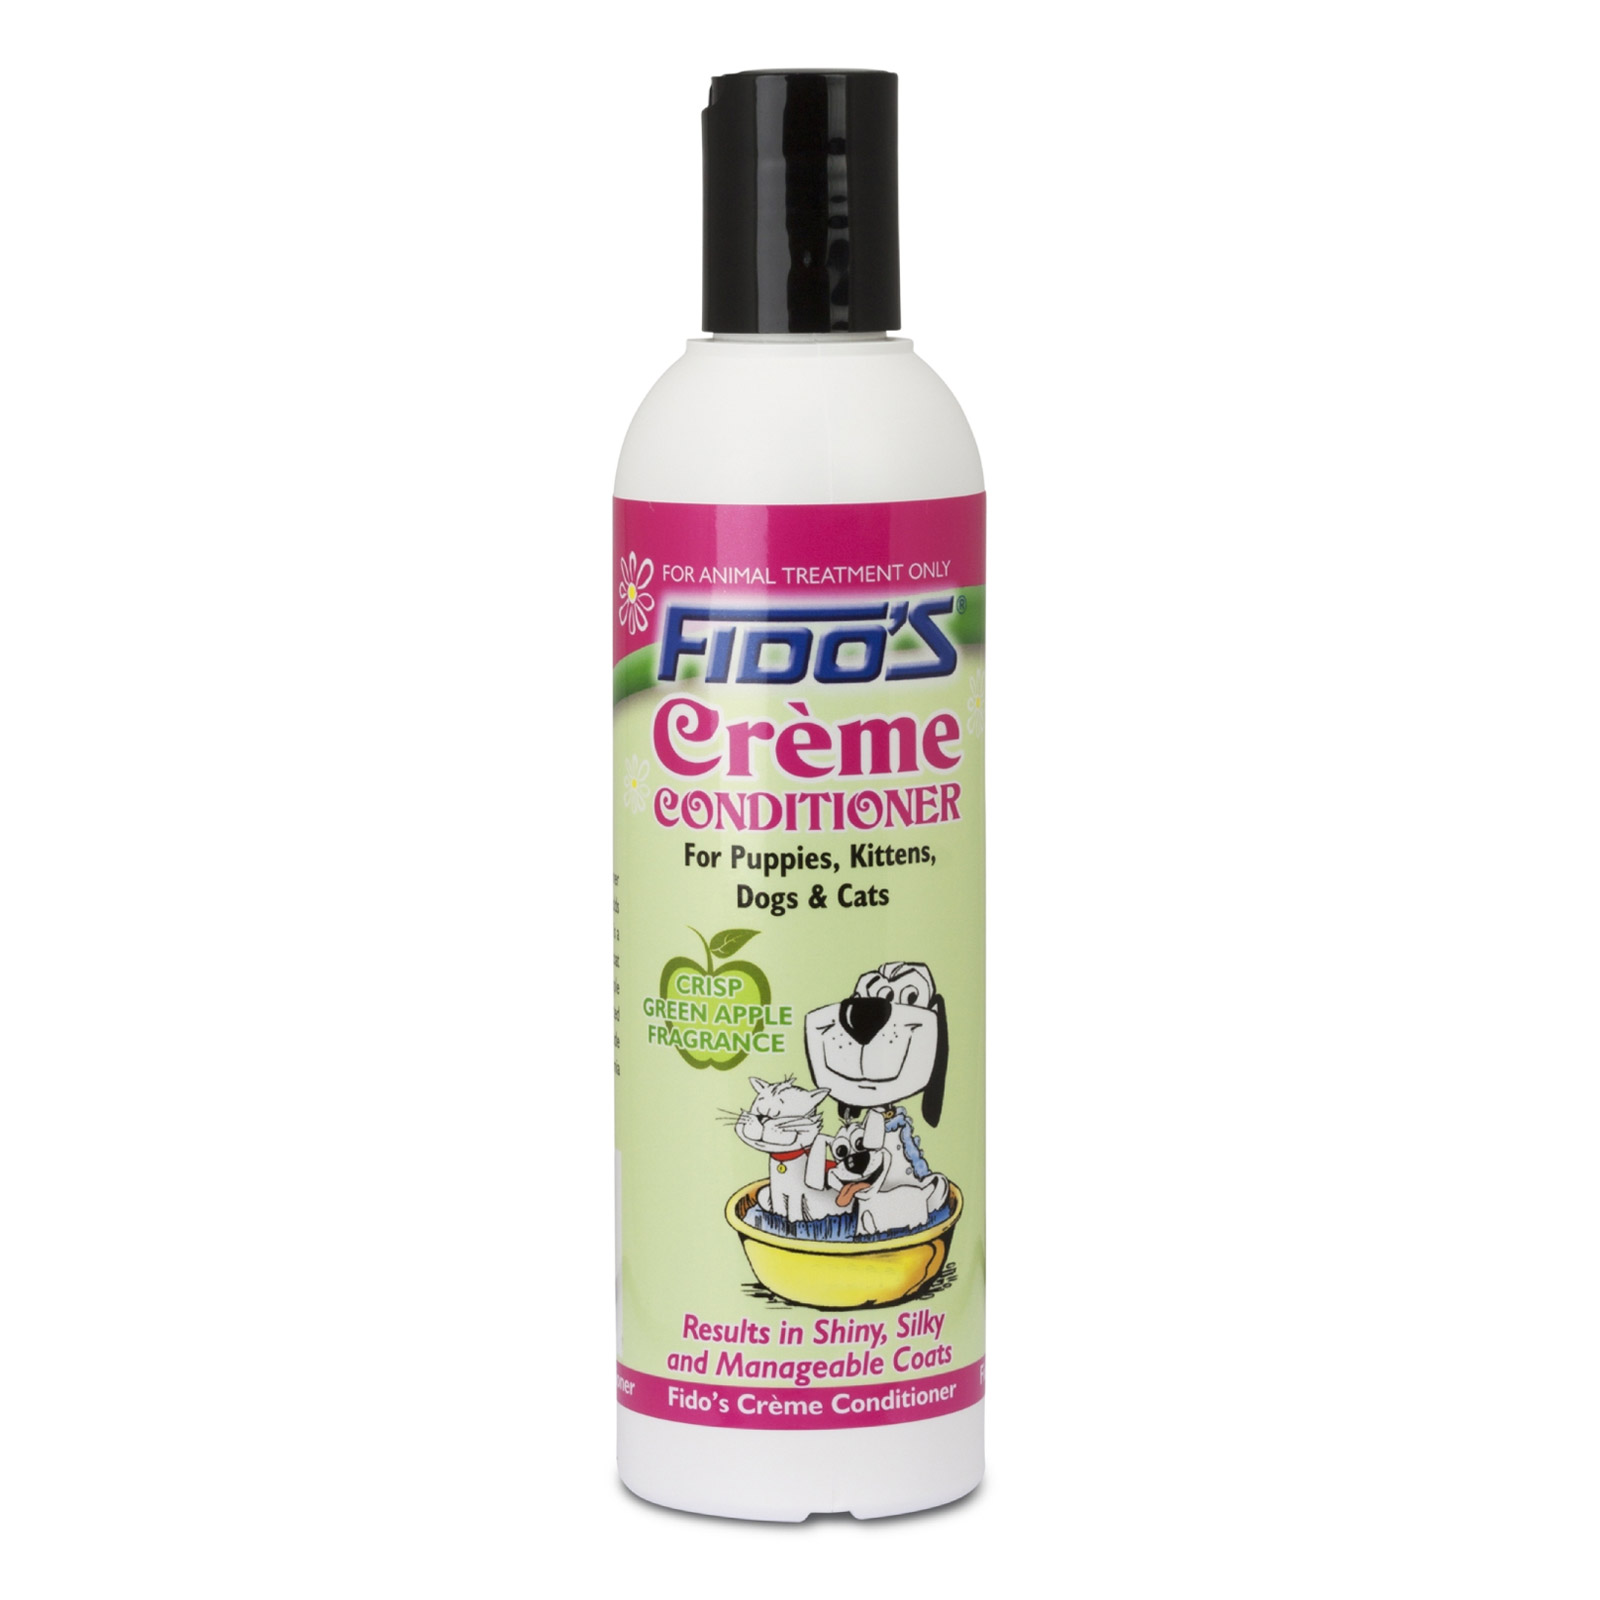 Fido's Creme Conditioner For Dogs and Cats